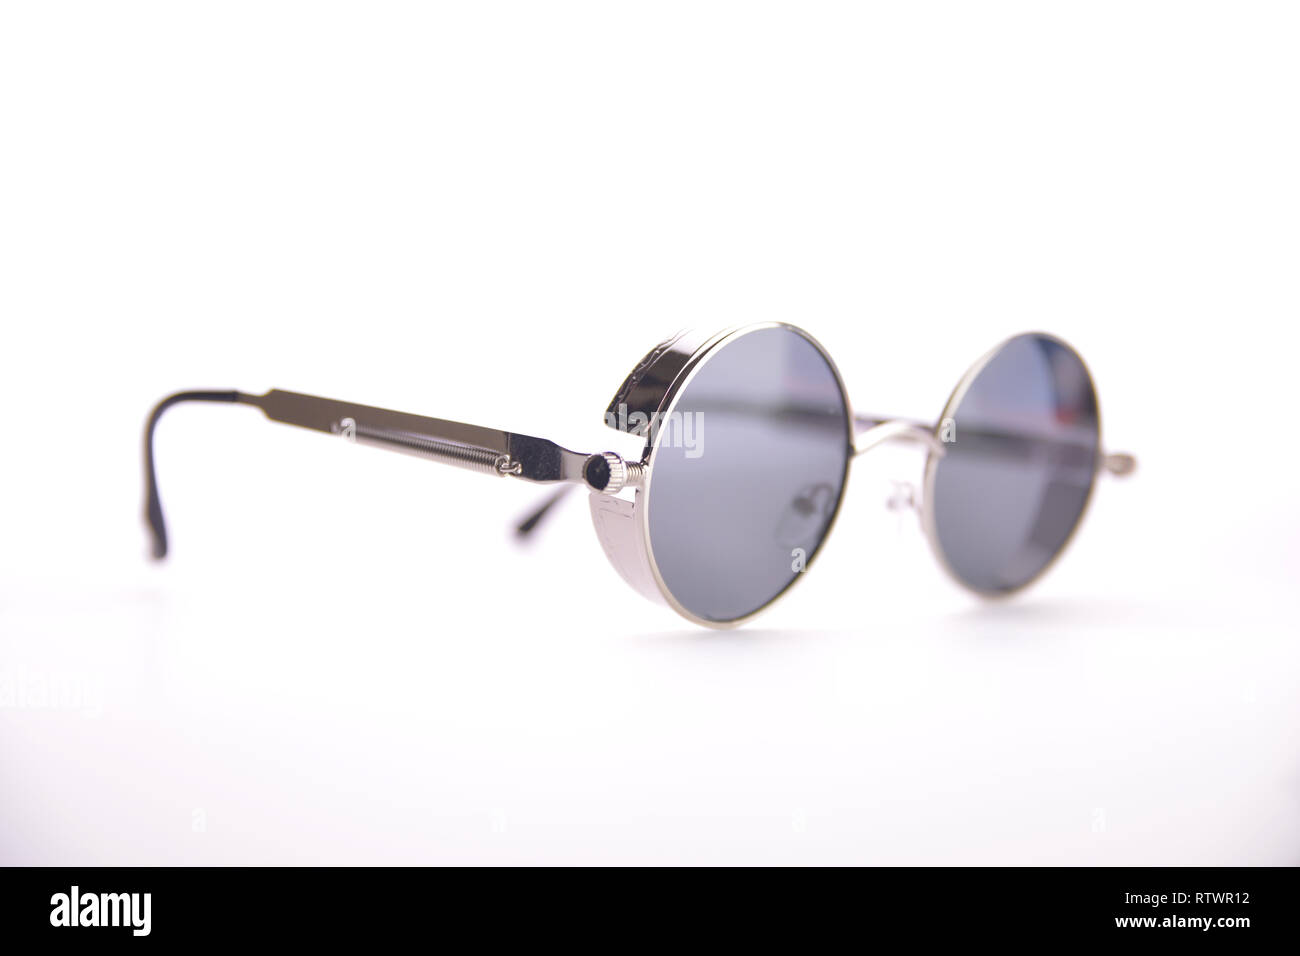 fashionable glasses in the style of steampunk on a white background. Stock Photo